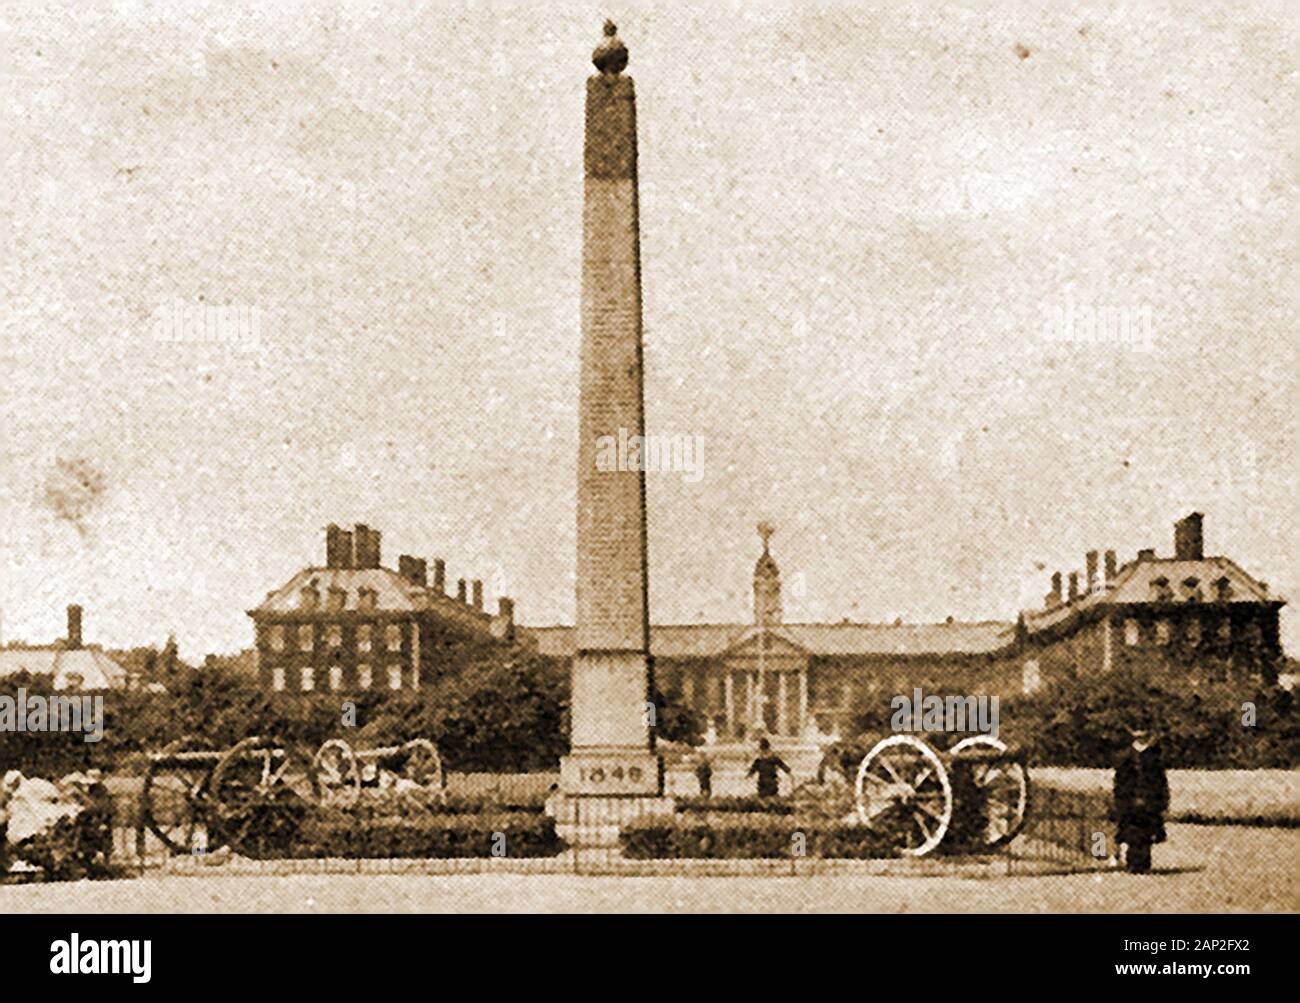 Royal Chelsea Hospital, London, UK (Home of the Chelsea Pensioners) as it was in 1921. Exterior photograph showing the Chillianwalla monument (obelisk) commemorating those who died in battle at Chillianwalla on  13 January 1849 (24th regiment of foot). It was founded as a military  almshouse by King Charles 2nd Stock Photo